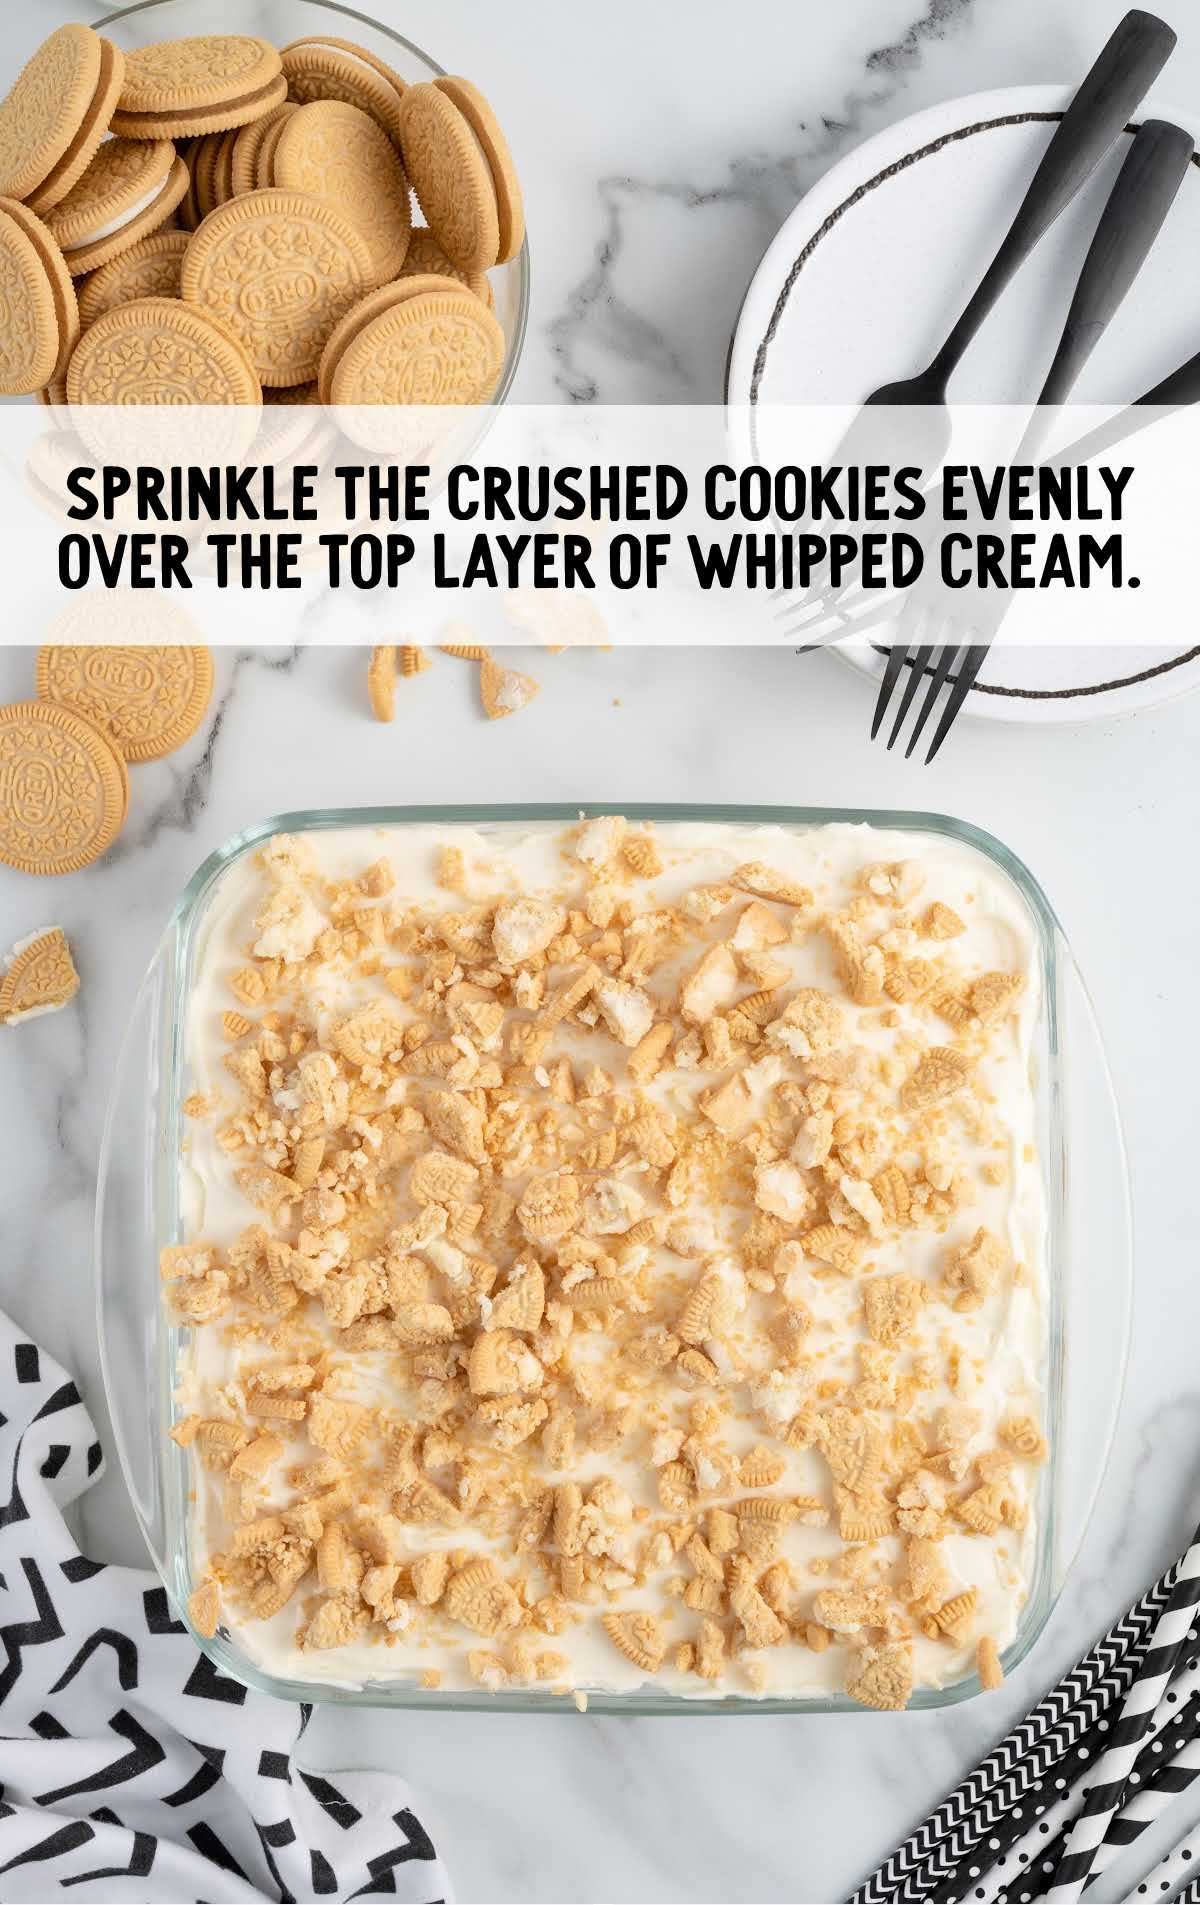 crushed cookies sprinkled over the layer of whipped cream